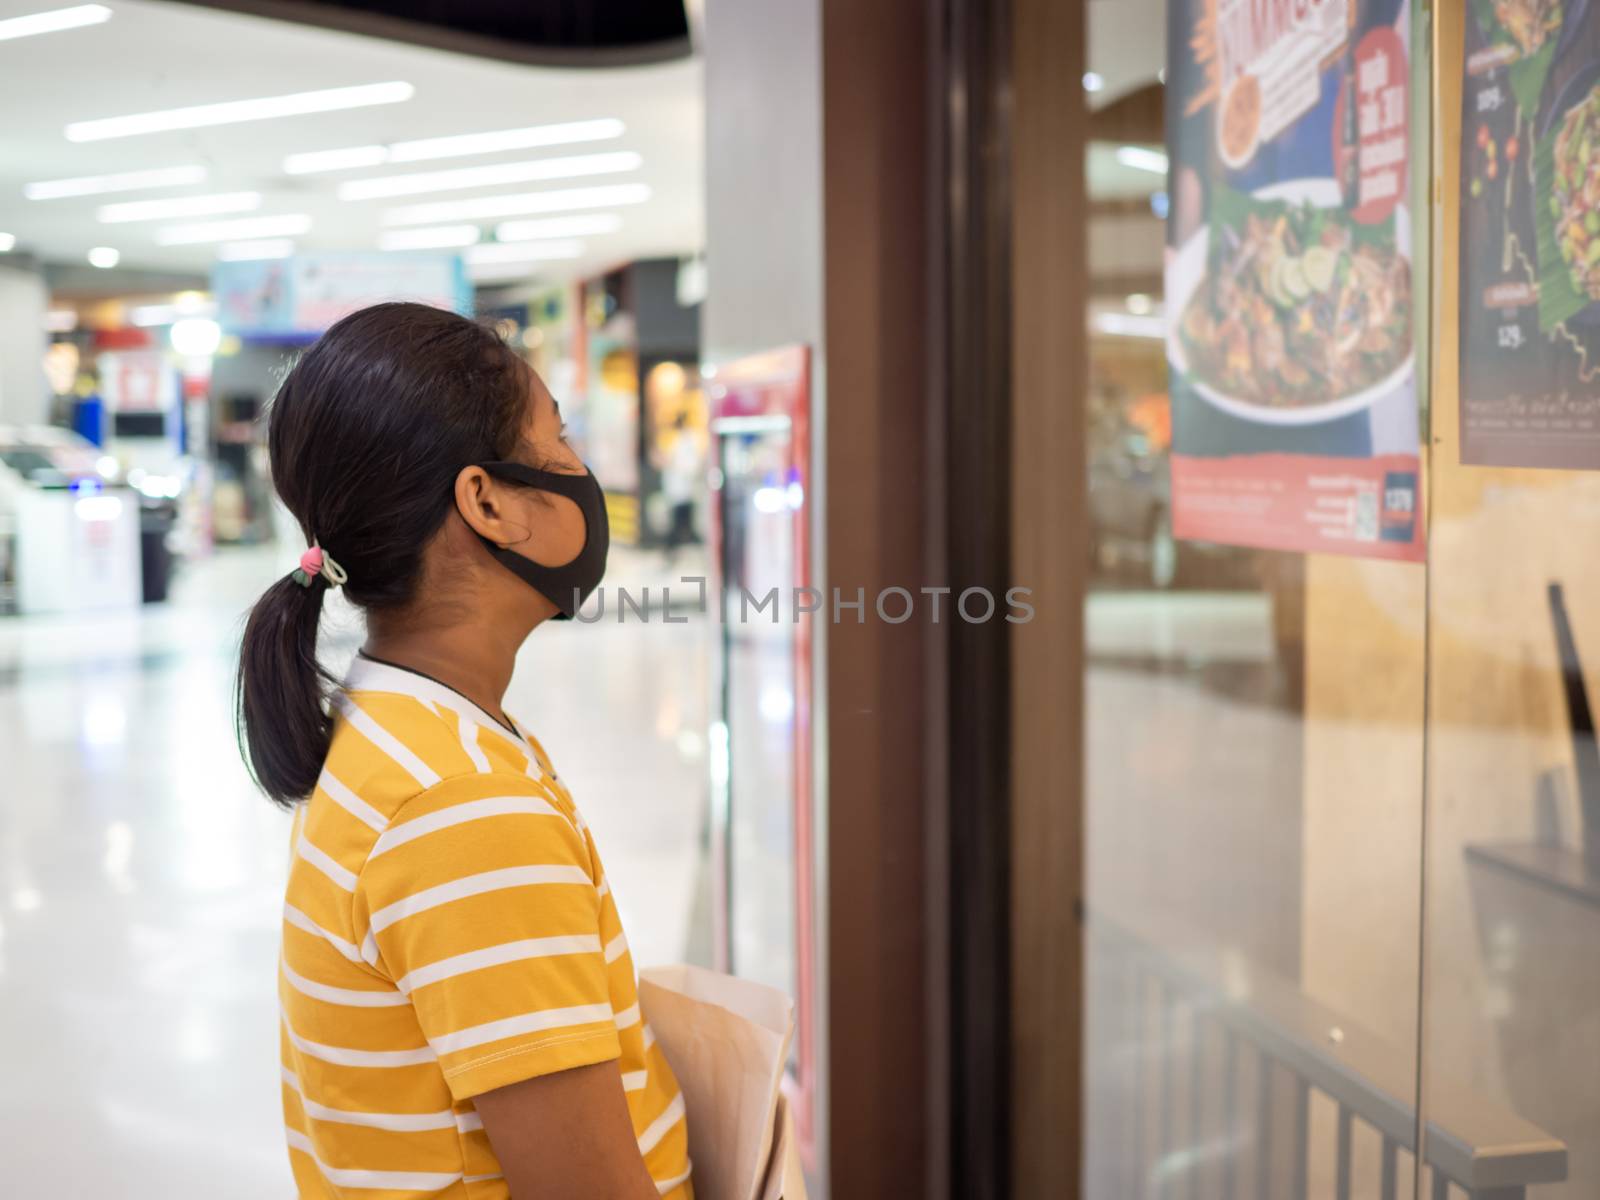 A woman wearing a mask in a shopping mall And looking at the sign in front of the restaurant.